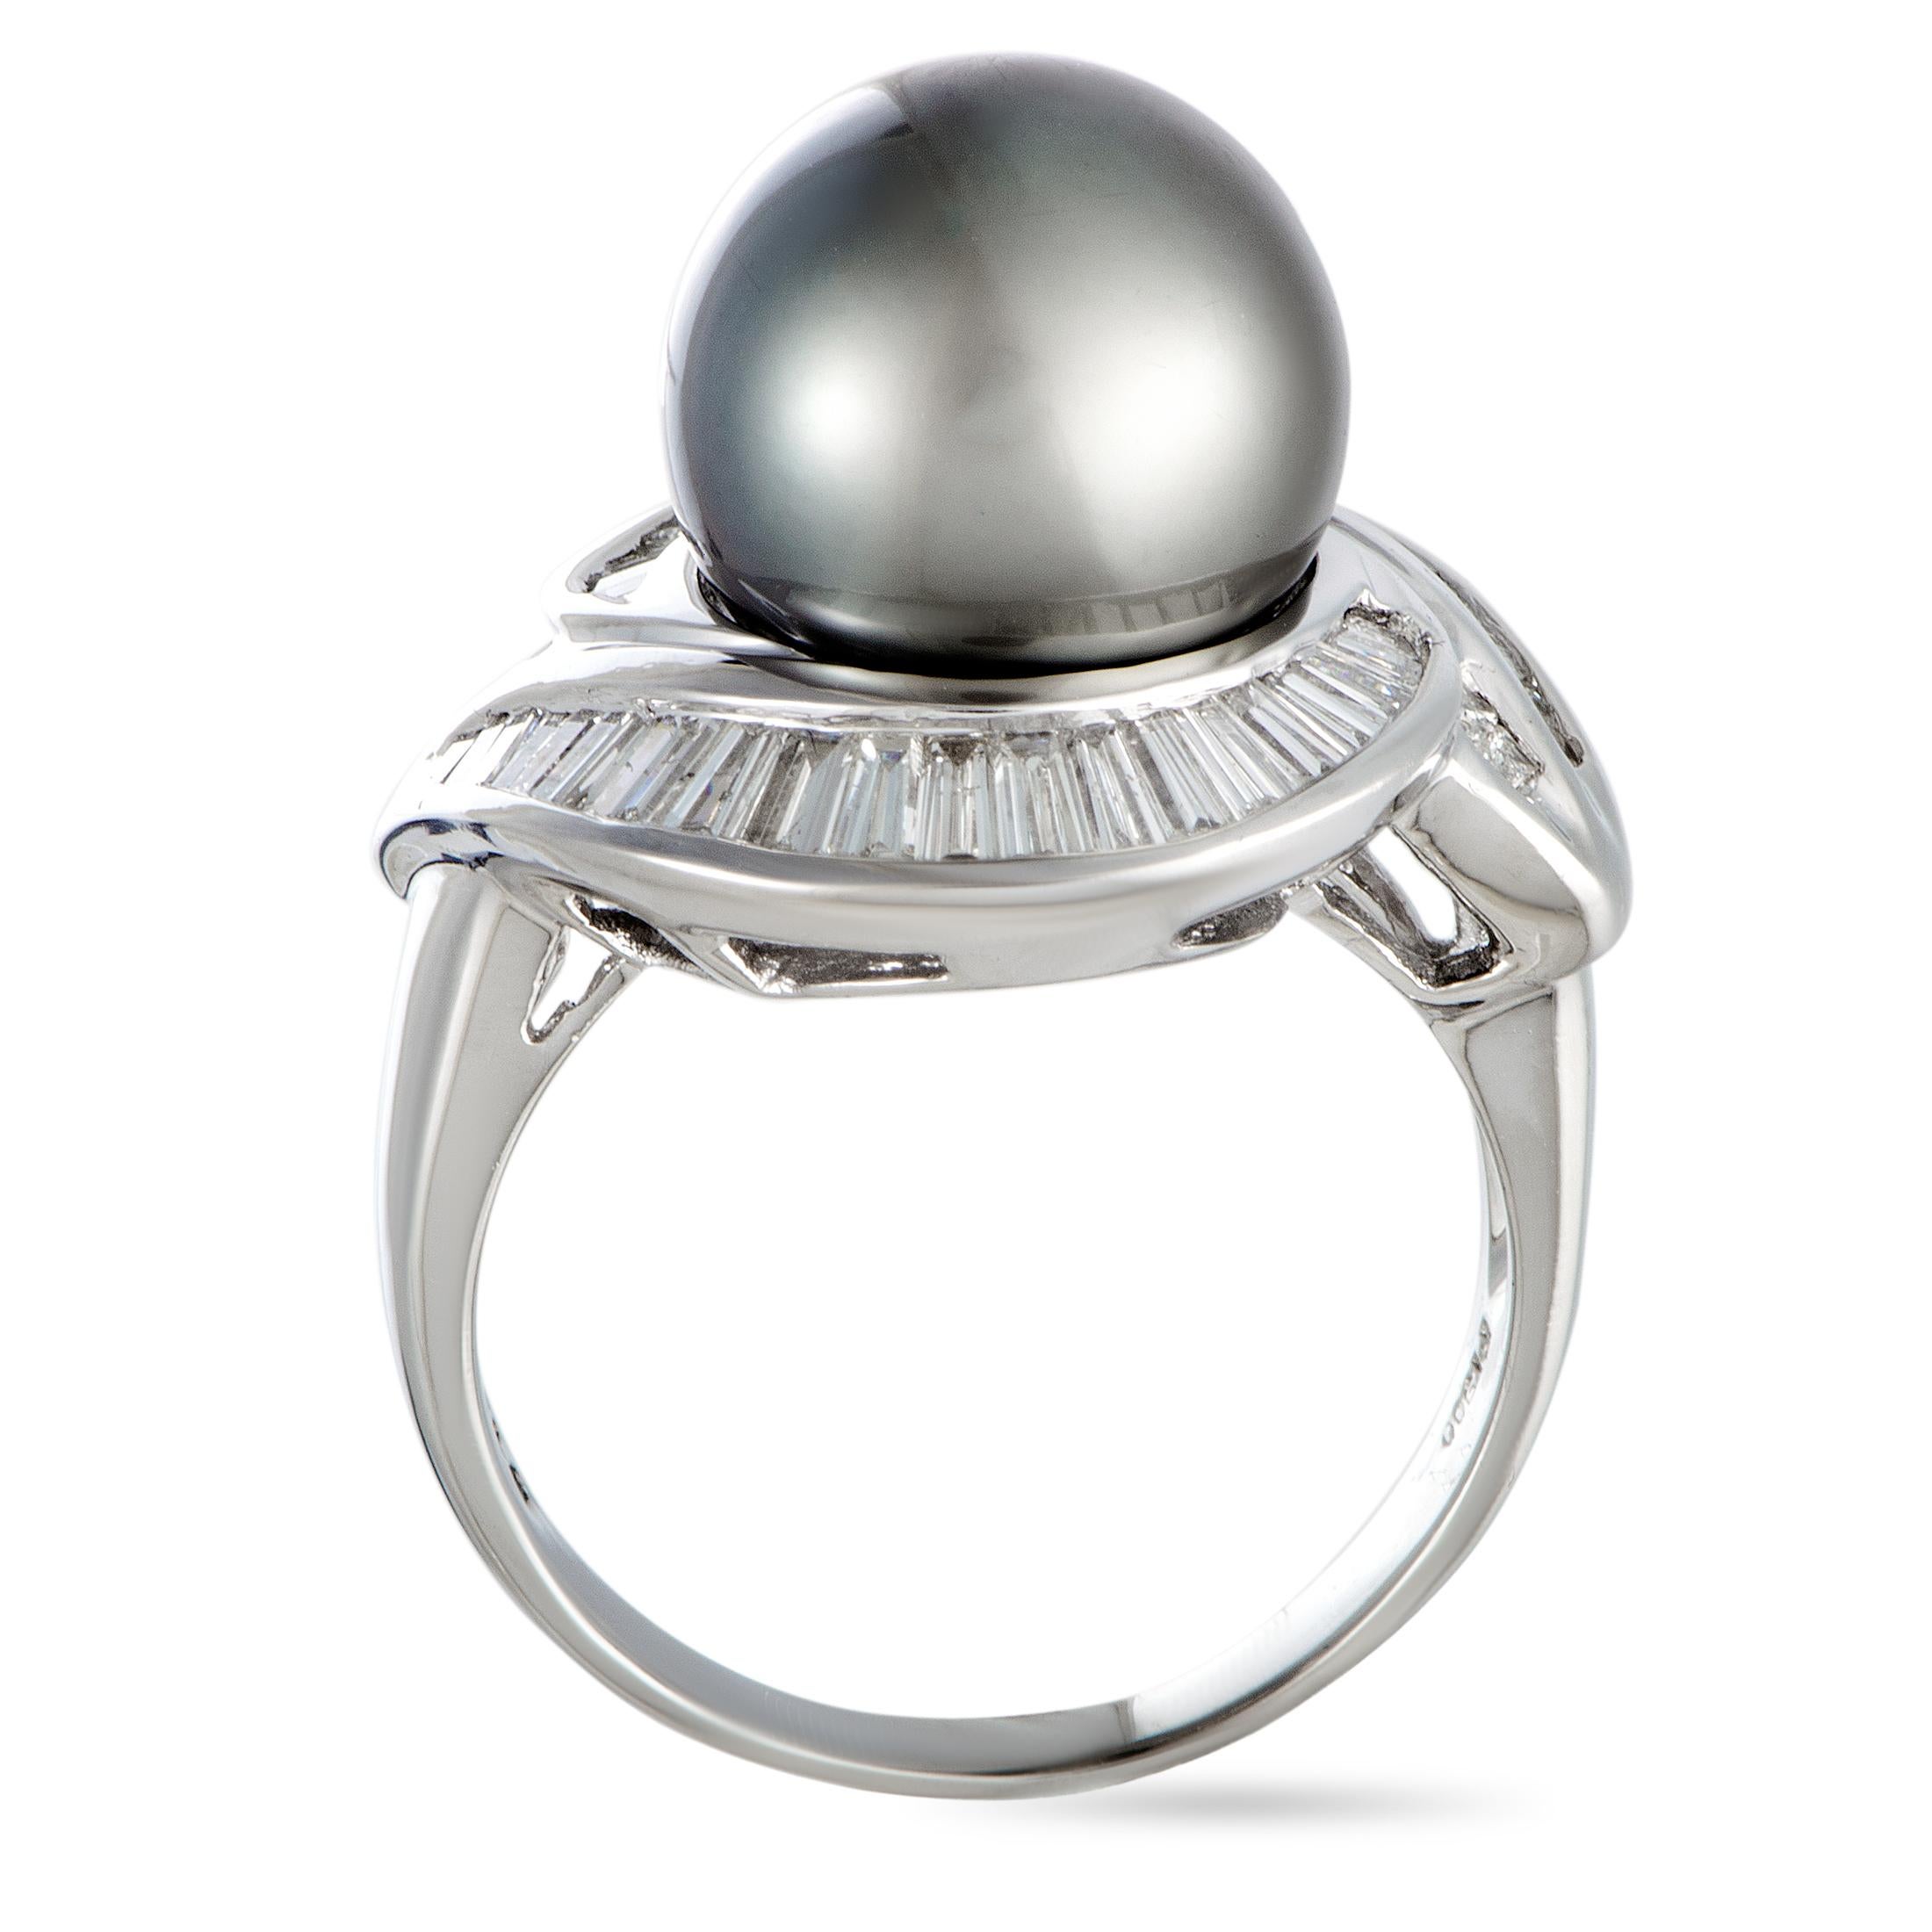 This ring is crafted from platinum and set with an 11.3 mm black pearl and with diamonds that total 1.28 carats. The ring weighs 11.5 grams, boasting band thickness of 3 mm and top height of 14 mm, while top dimensions measure 12 by 12 mm.

Ring